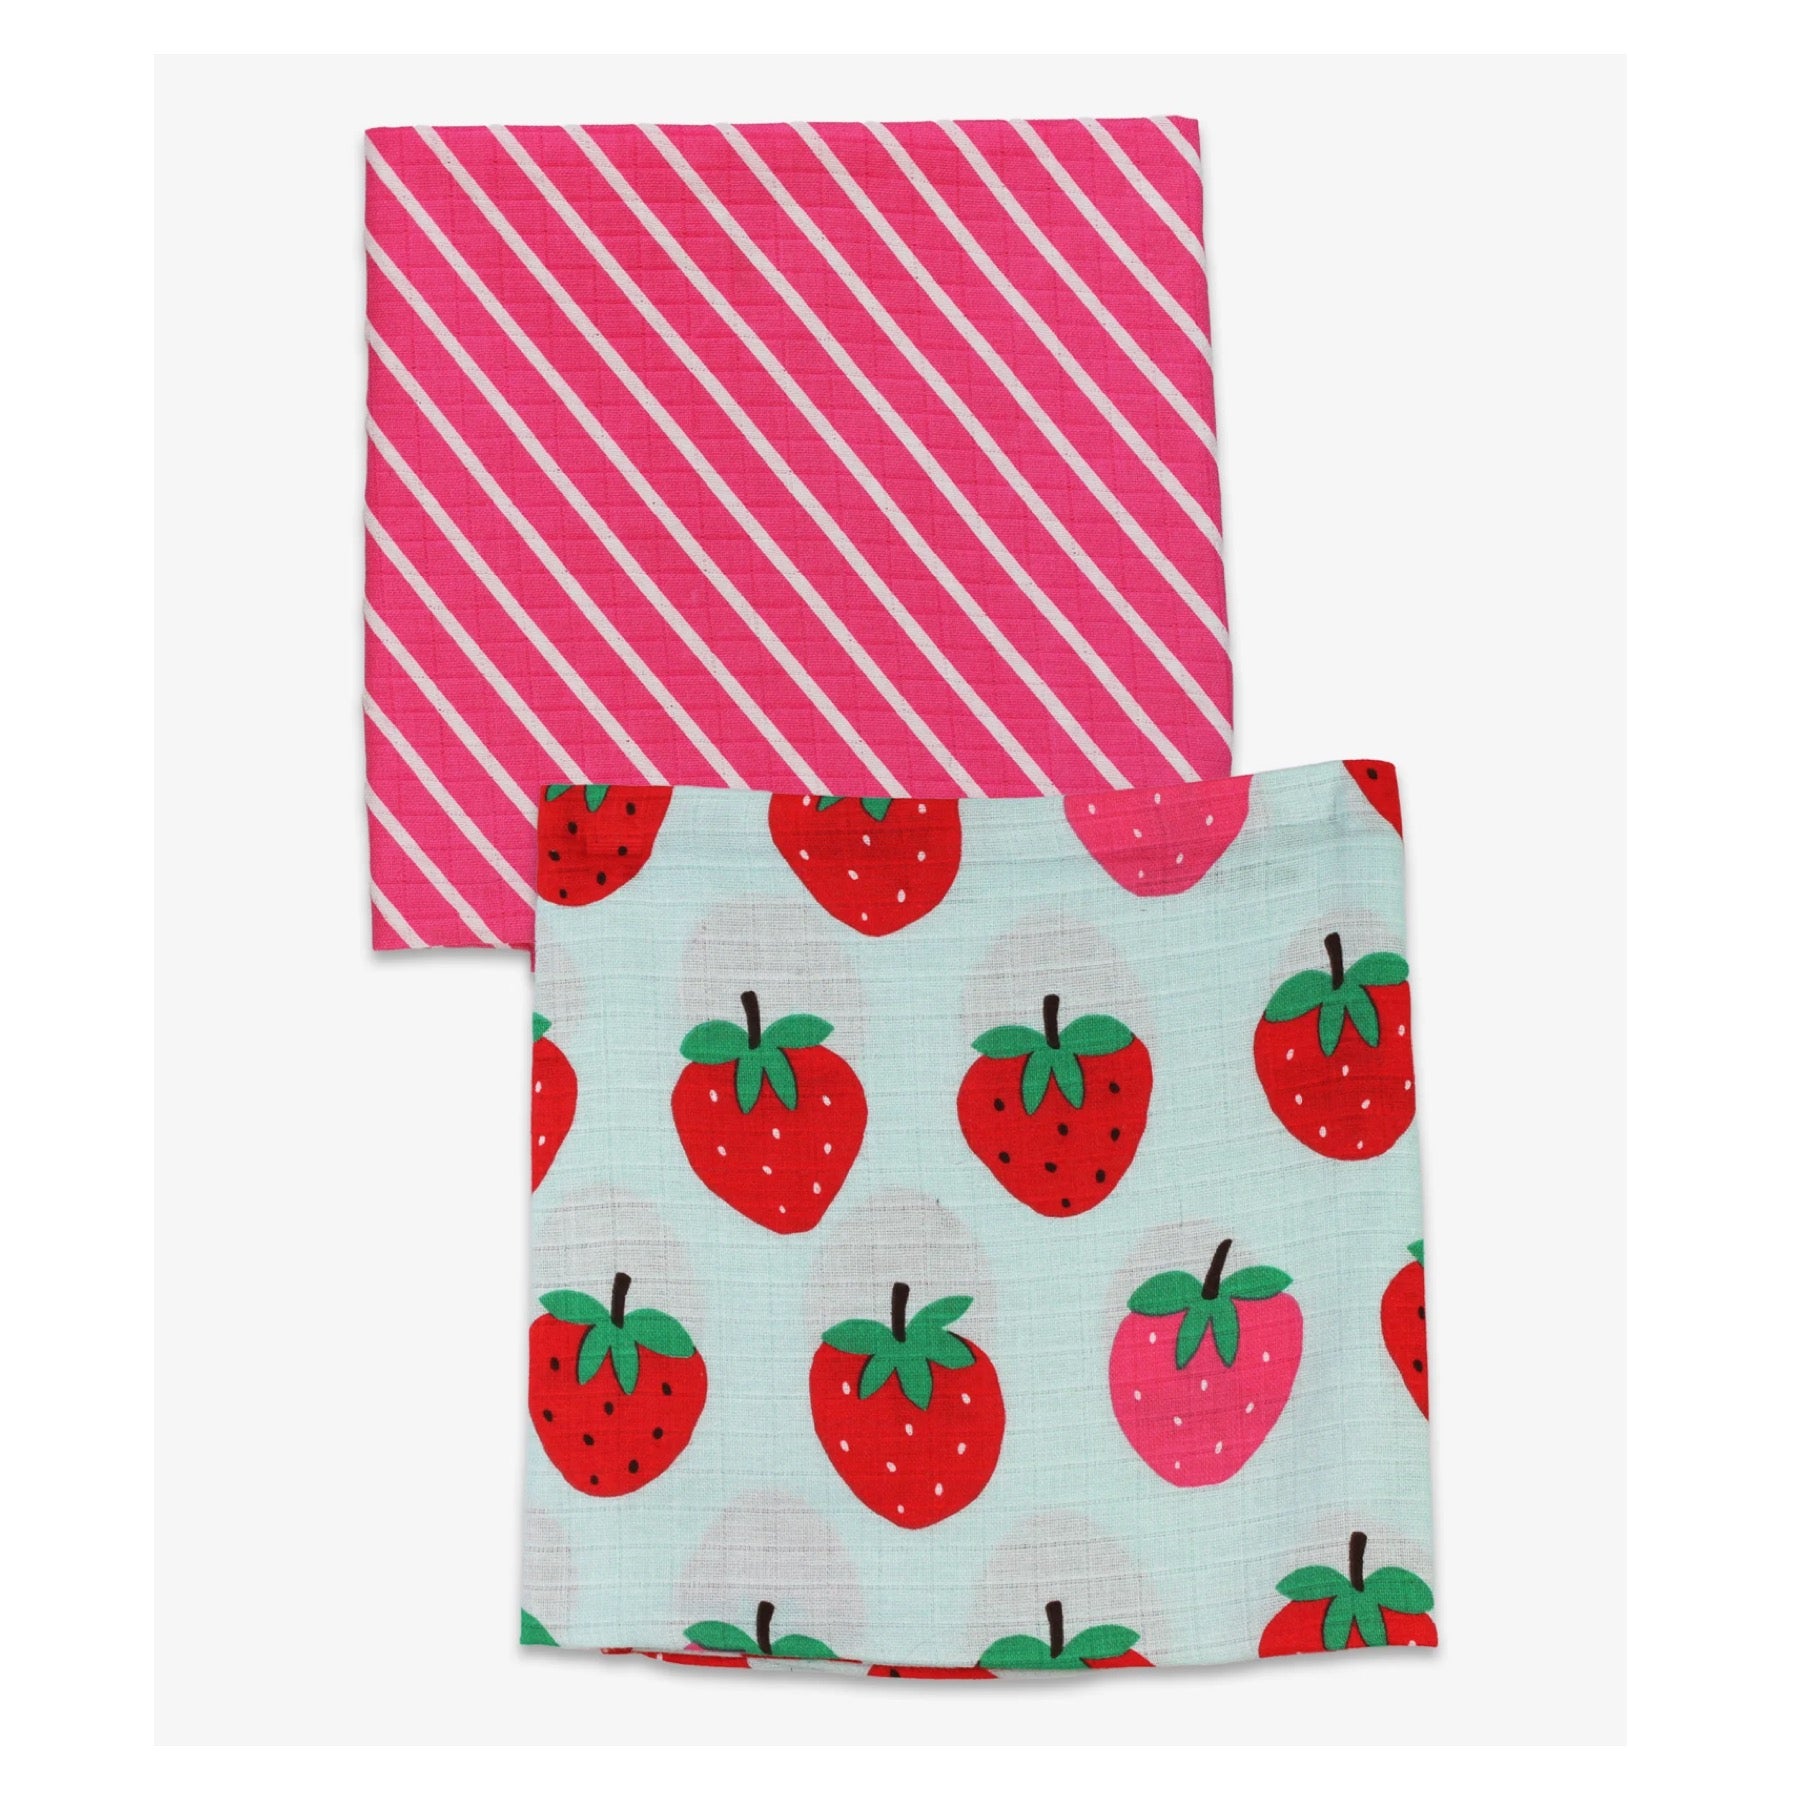 Toby Tiger Muslins (2 Pack) Strawberry